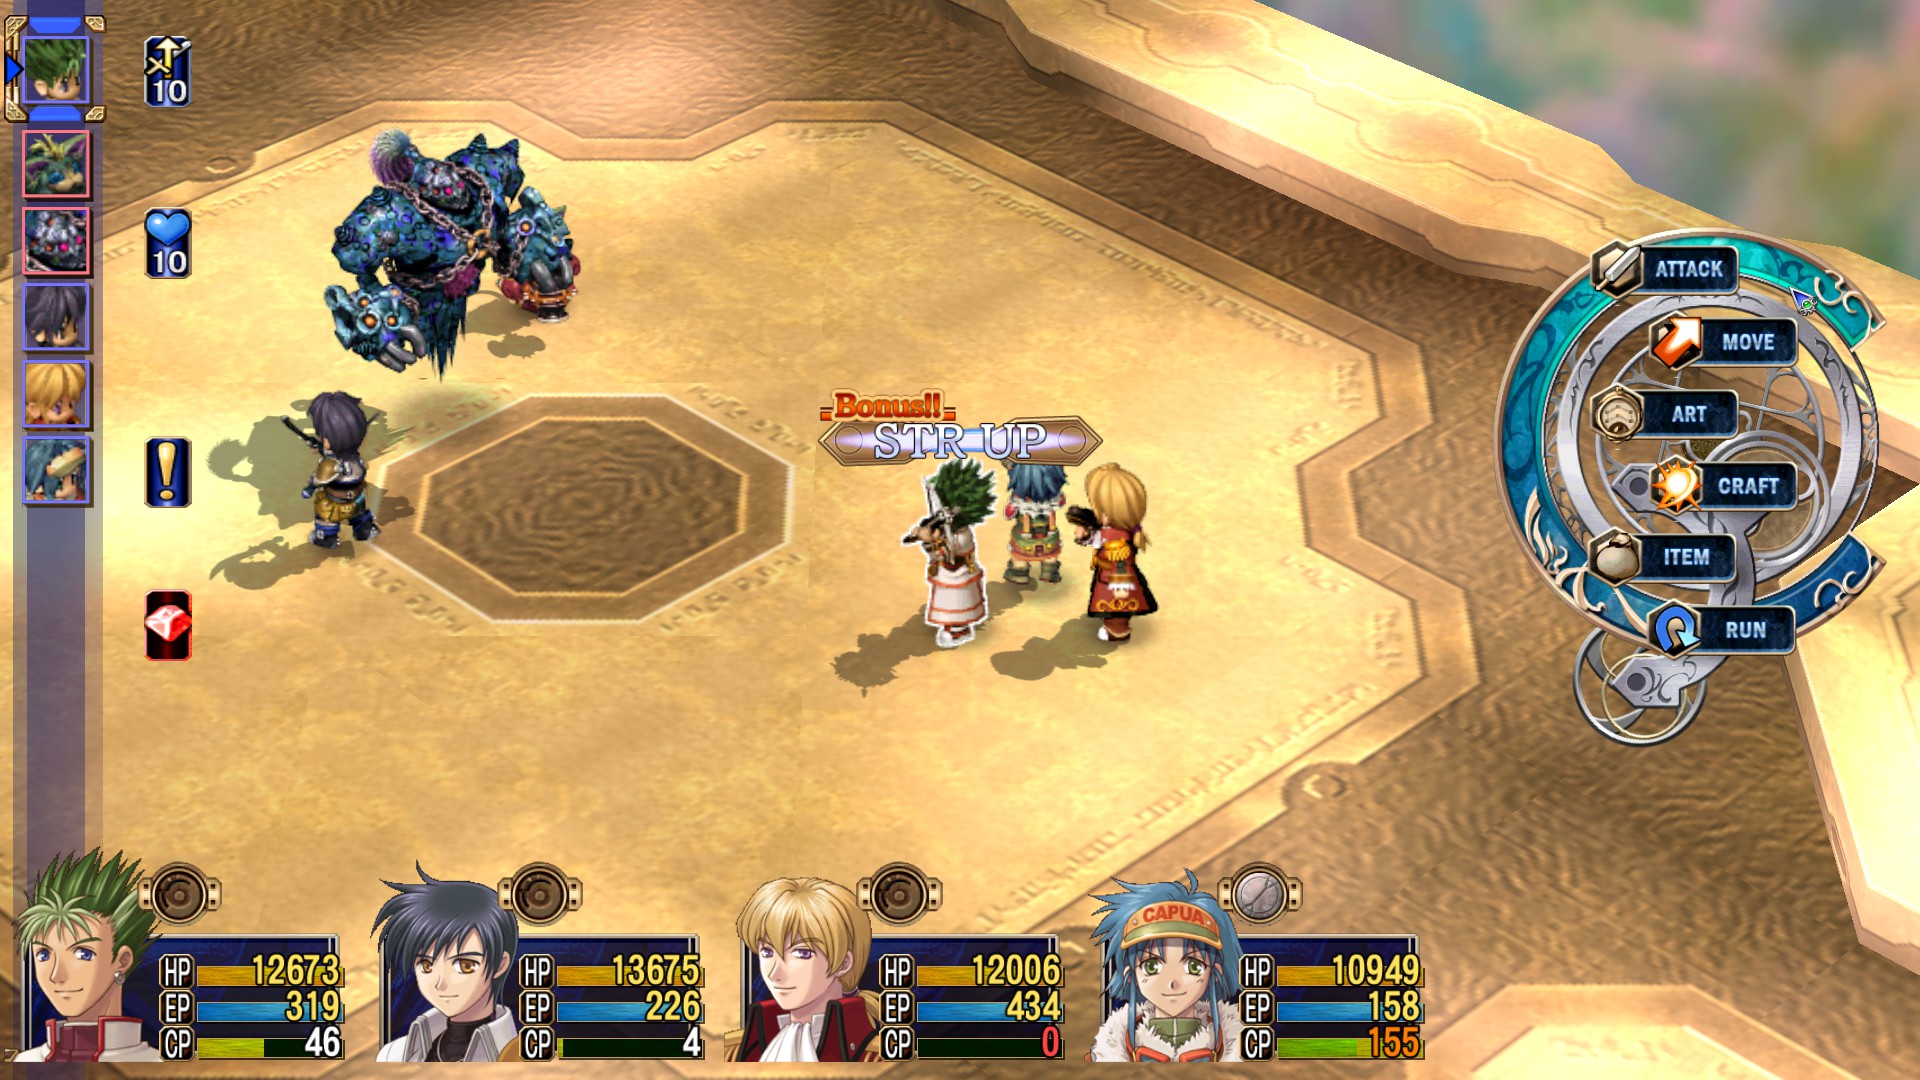 legends of heroes trails in the sky